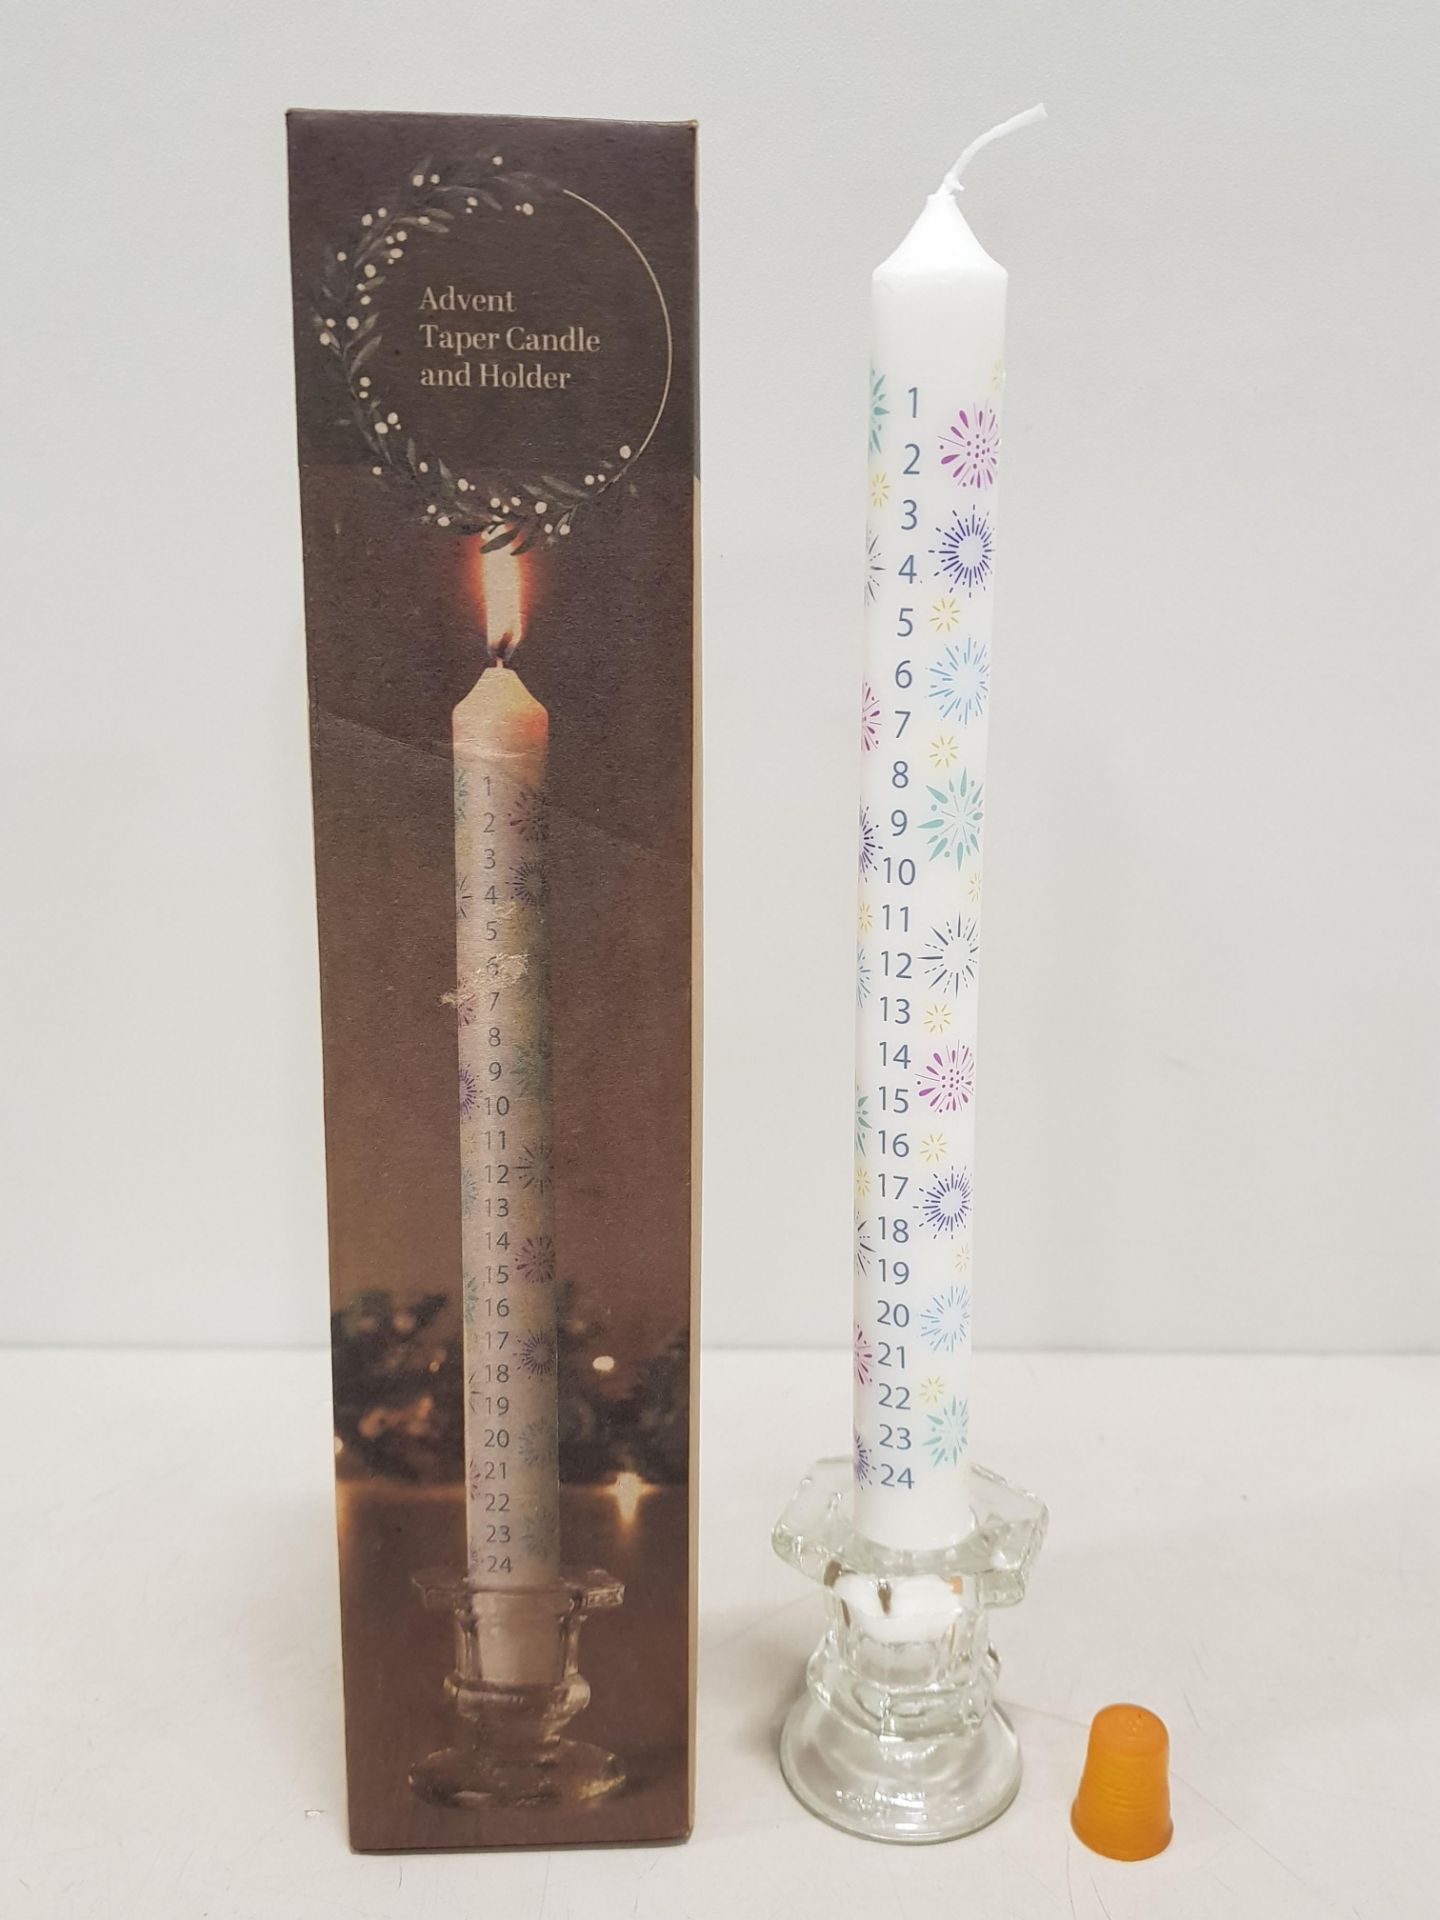 72 X BRAND NEW LAKELAND ADVENT TAPER CANDLE WITH GLASS HOLDER - IN 3 BOXES